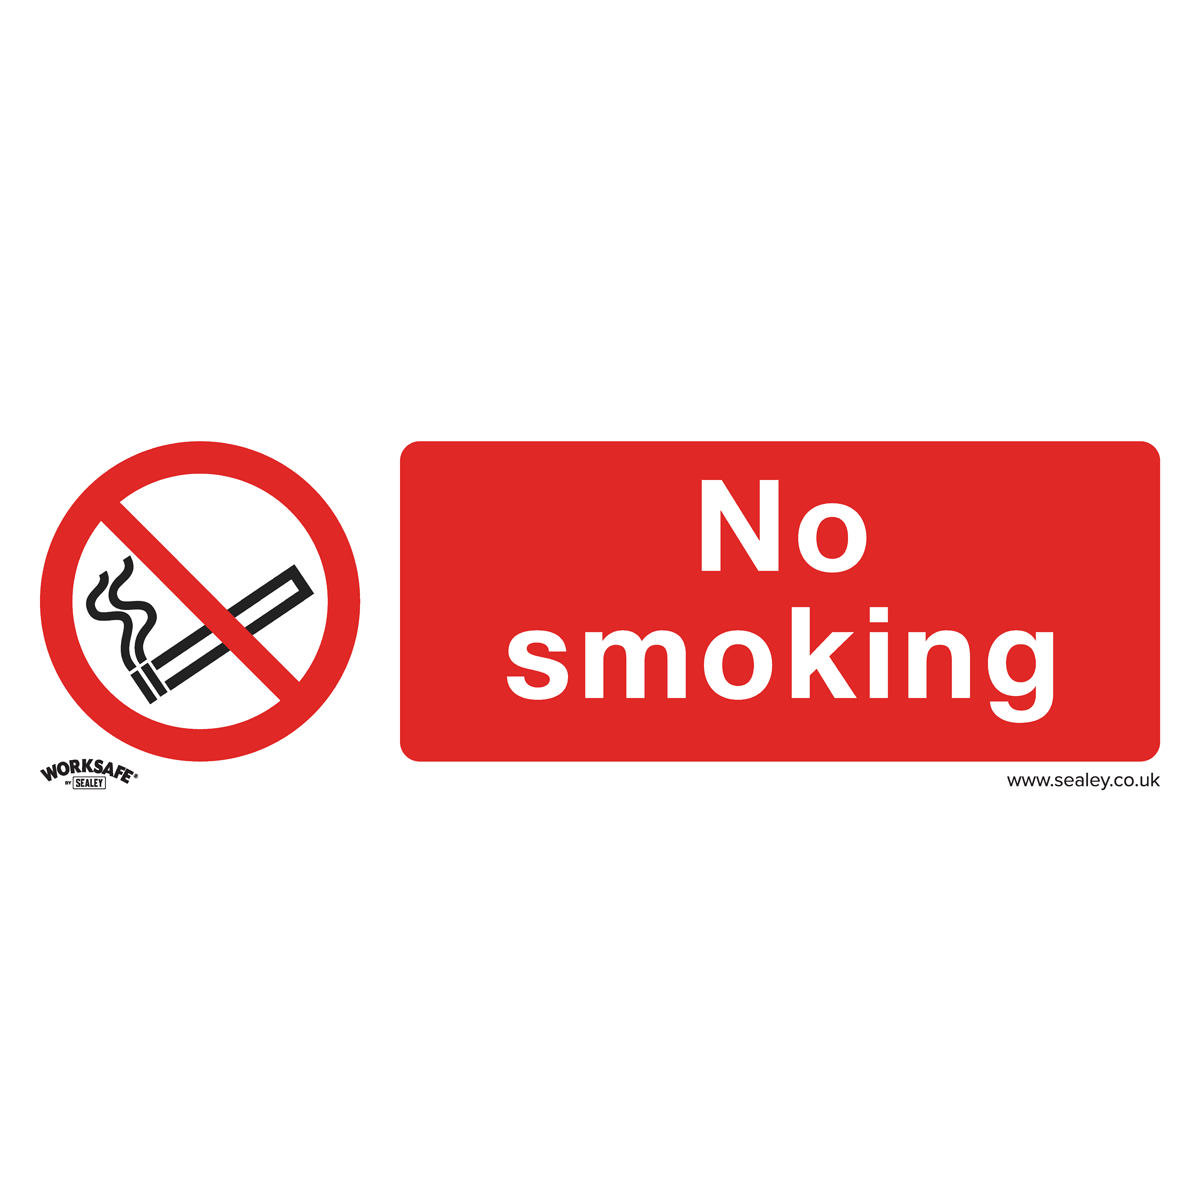 Sealey Prohibition Safety Sign - No Smoking - Rigid Plastic - Pack of 10